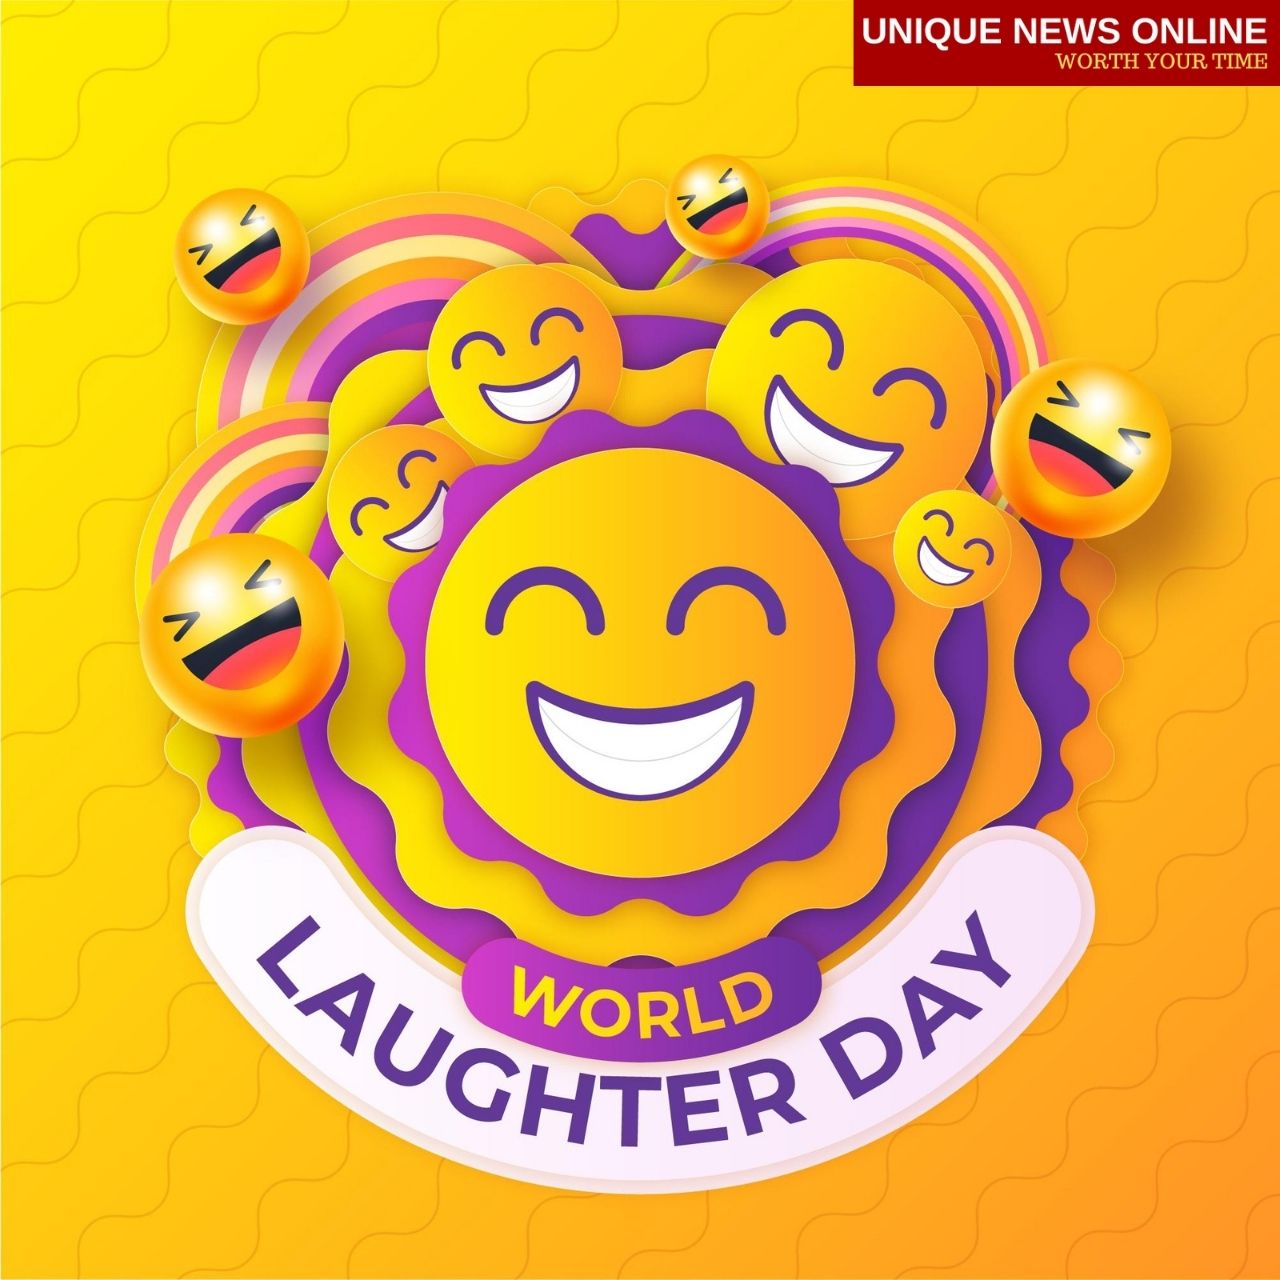 Happy World Laughter Day 2021 Theme, Wishes, WhatsApp Status Videos, Quotes, Messages, Jokes, and Images